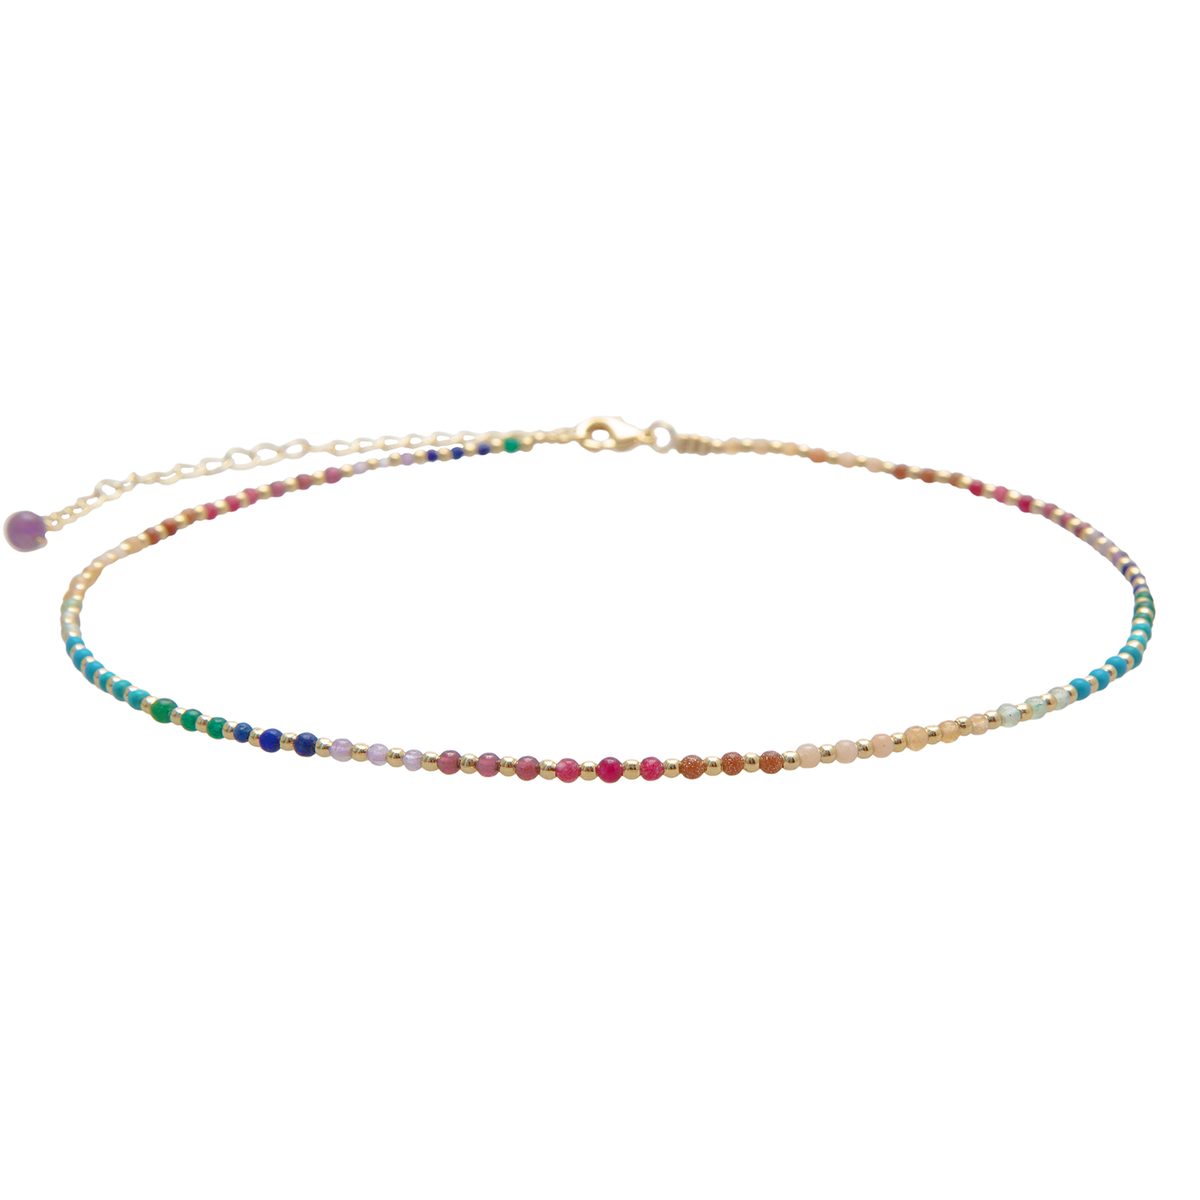 4mm multicolor stone and gold bead healing necklace on a gold chain